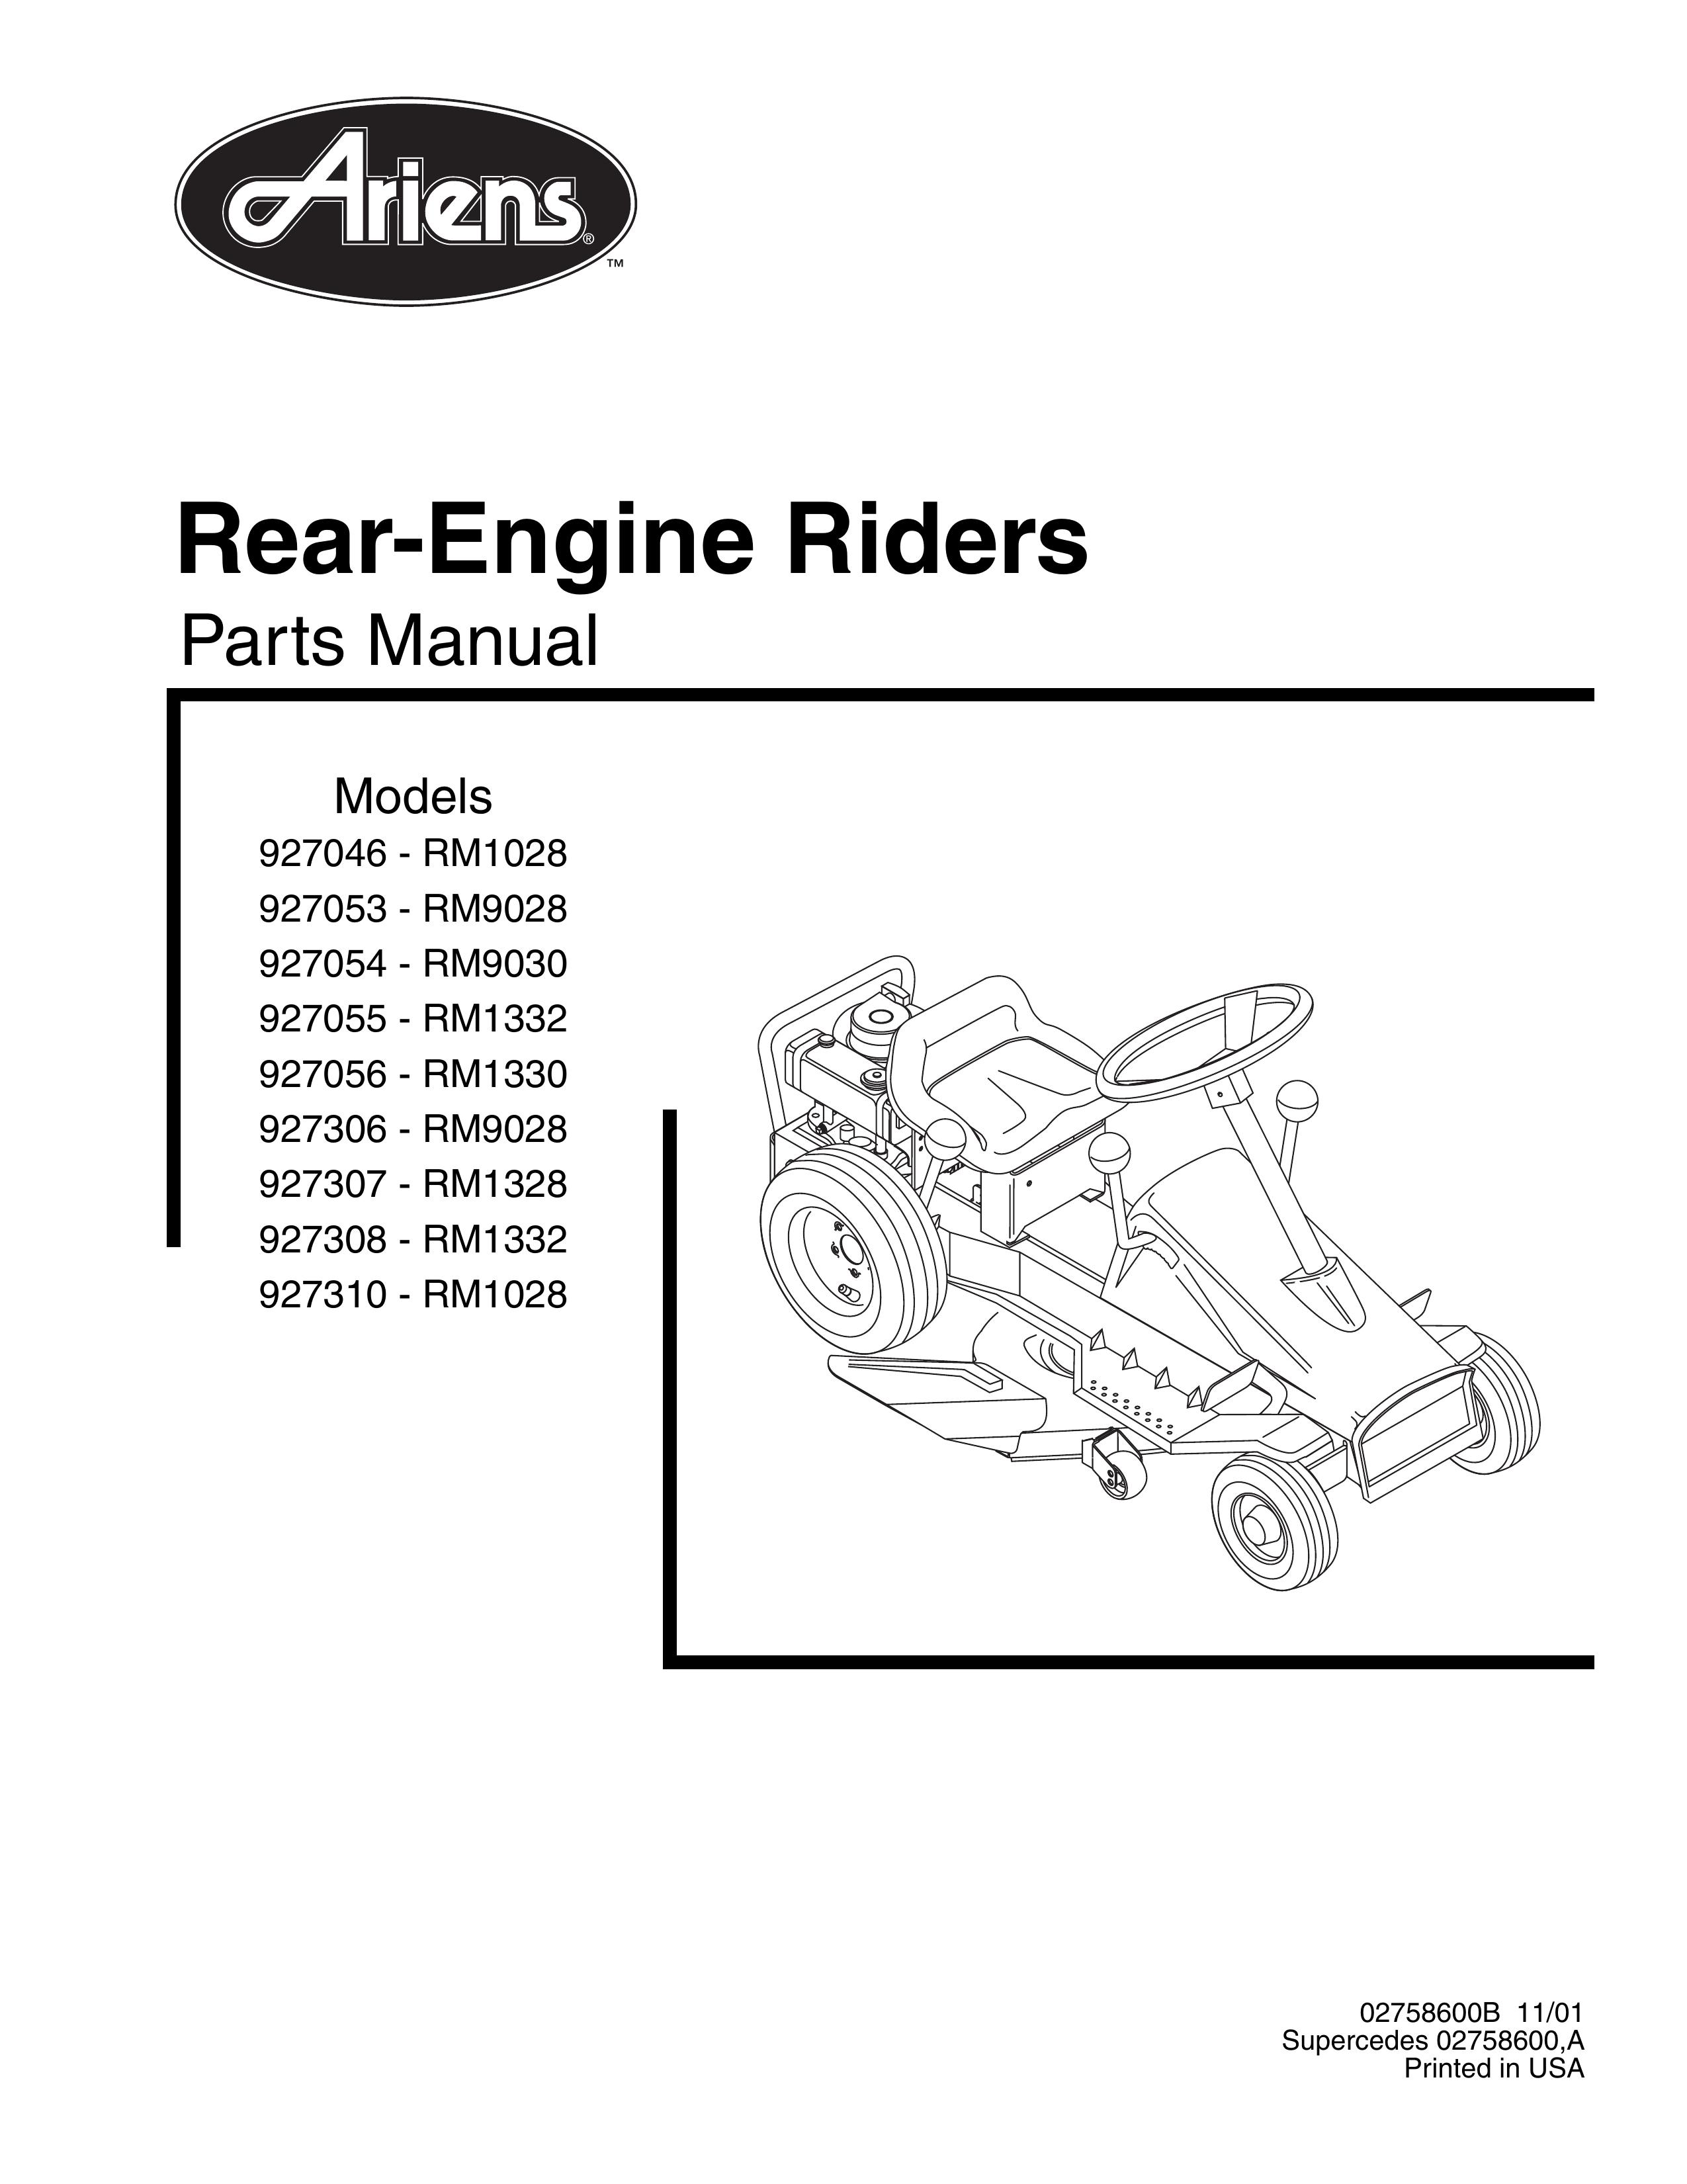 Ariens 927056 - RM1330 Camcorder User Manual